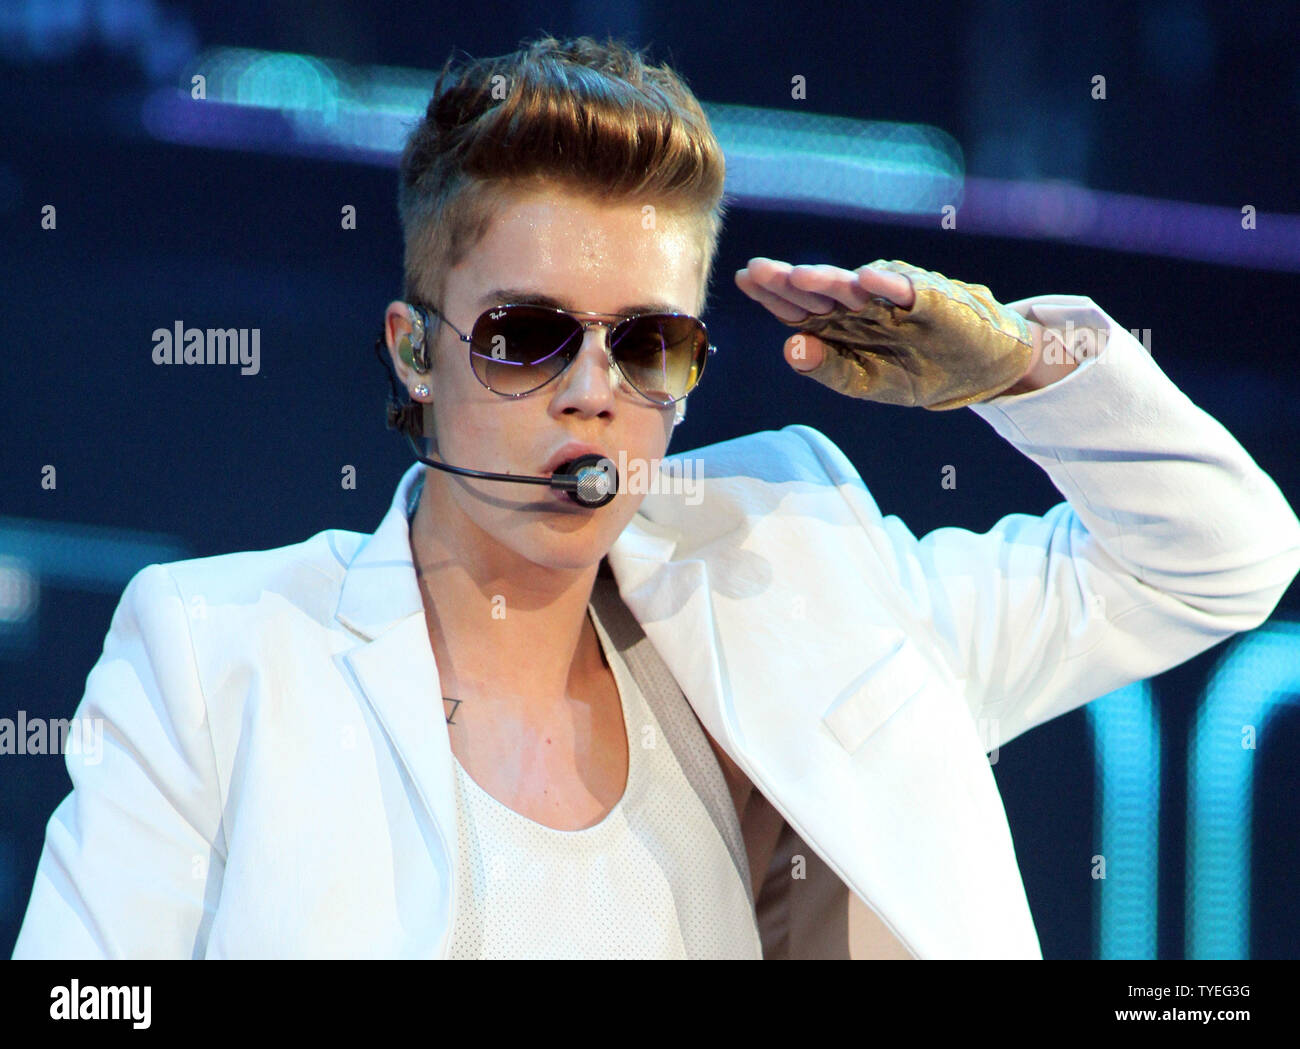 Justin Bieber performs in concert on his Believe tour at the American Airlines Arena in Miami on January 26, 2013. UPI/Michael Bush Stock Photo